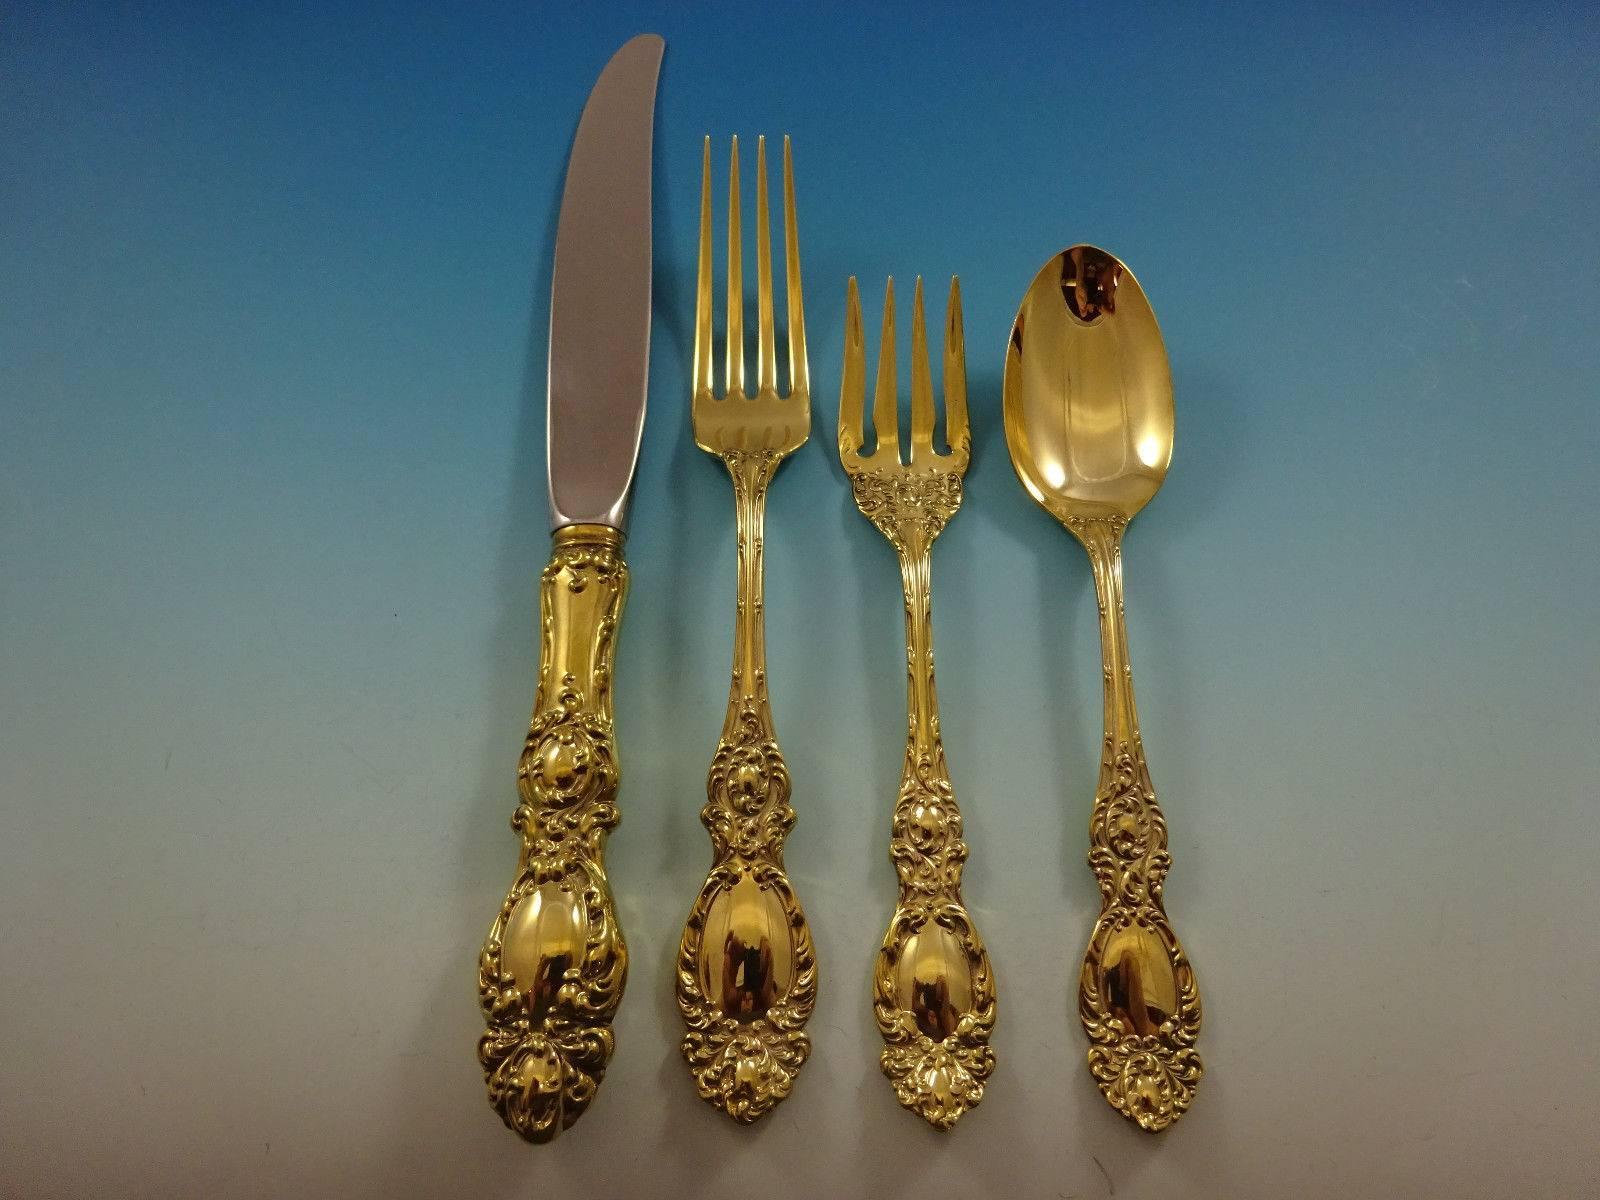 Add some luxe to your life with this fabulous Lucerne gold by Wallace sterling silver flatware set - 32 pieces. Gold flatware is on trend and makes a bold statement on your table. 

This set is vermeil (completely gold-washed) and includes:

Eight